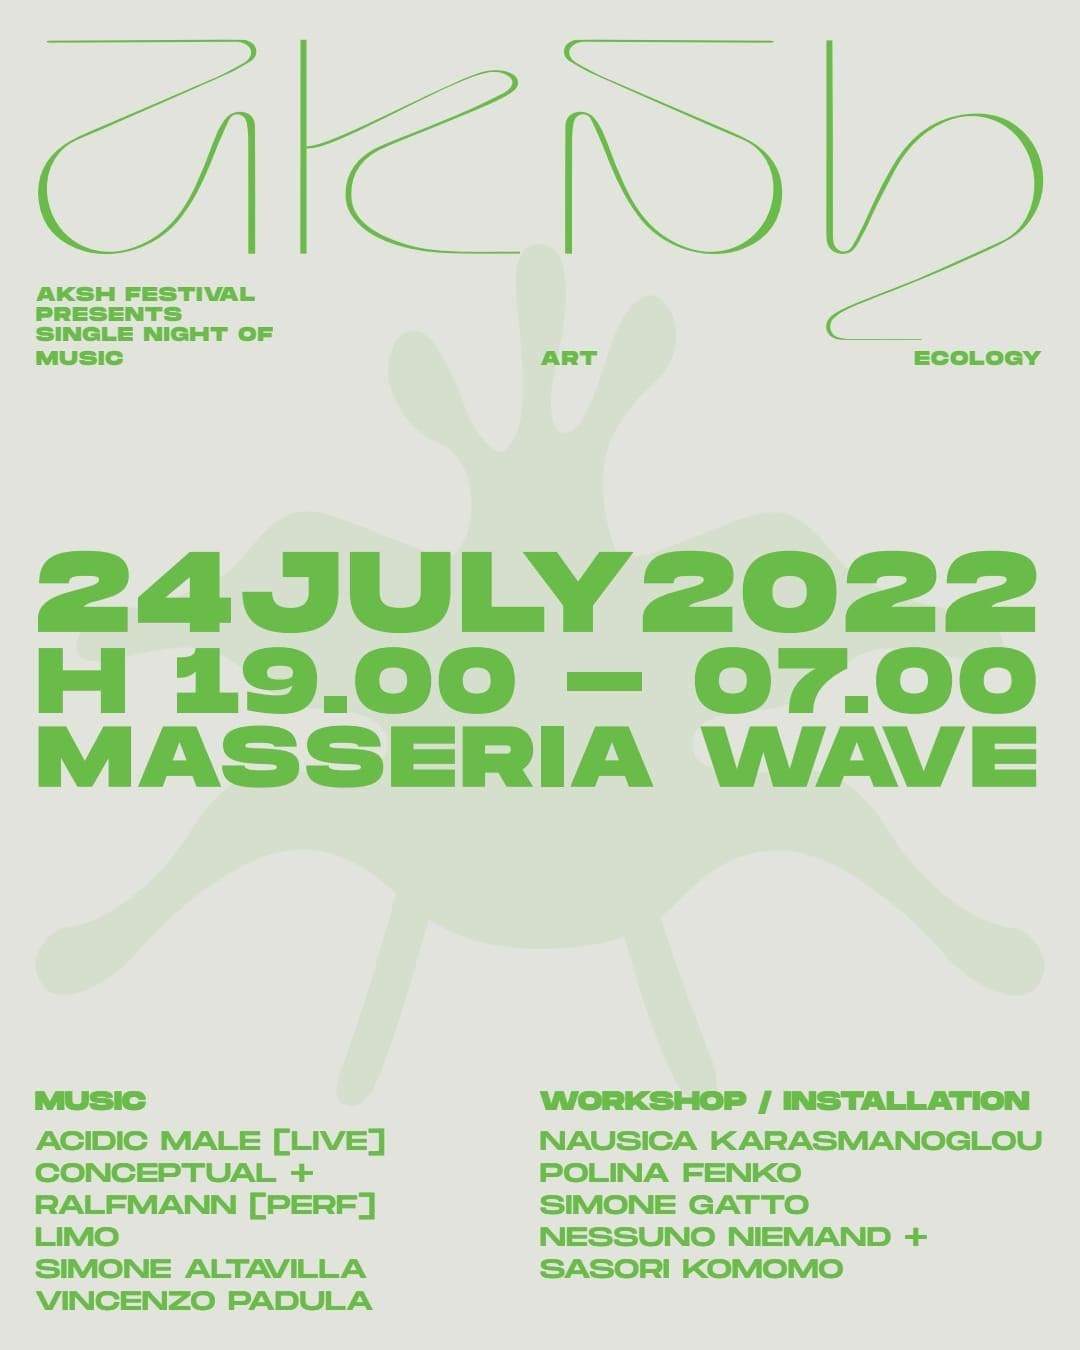 AKSH Festival new date 24/07 at Masseria Wave - フライヤー表